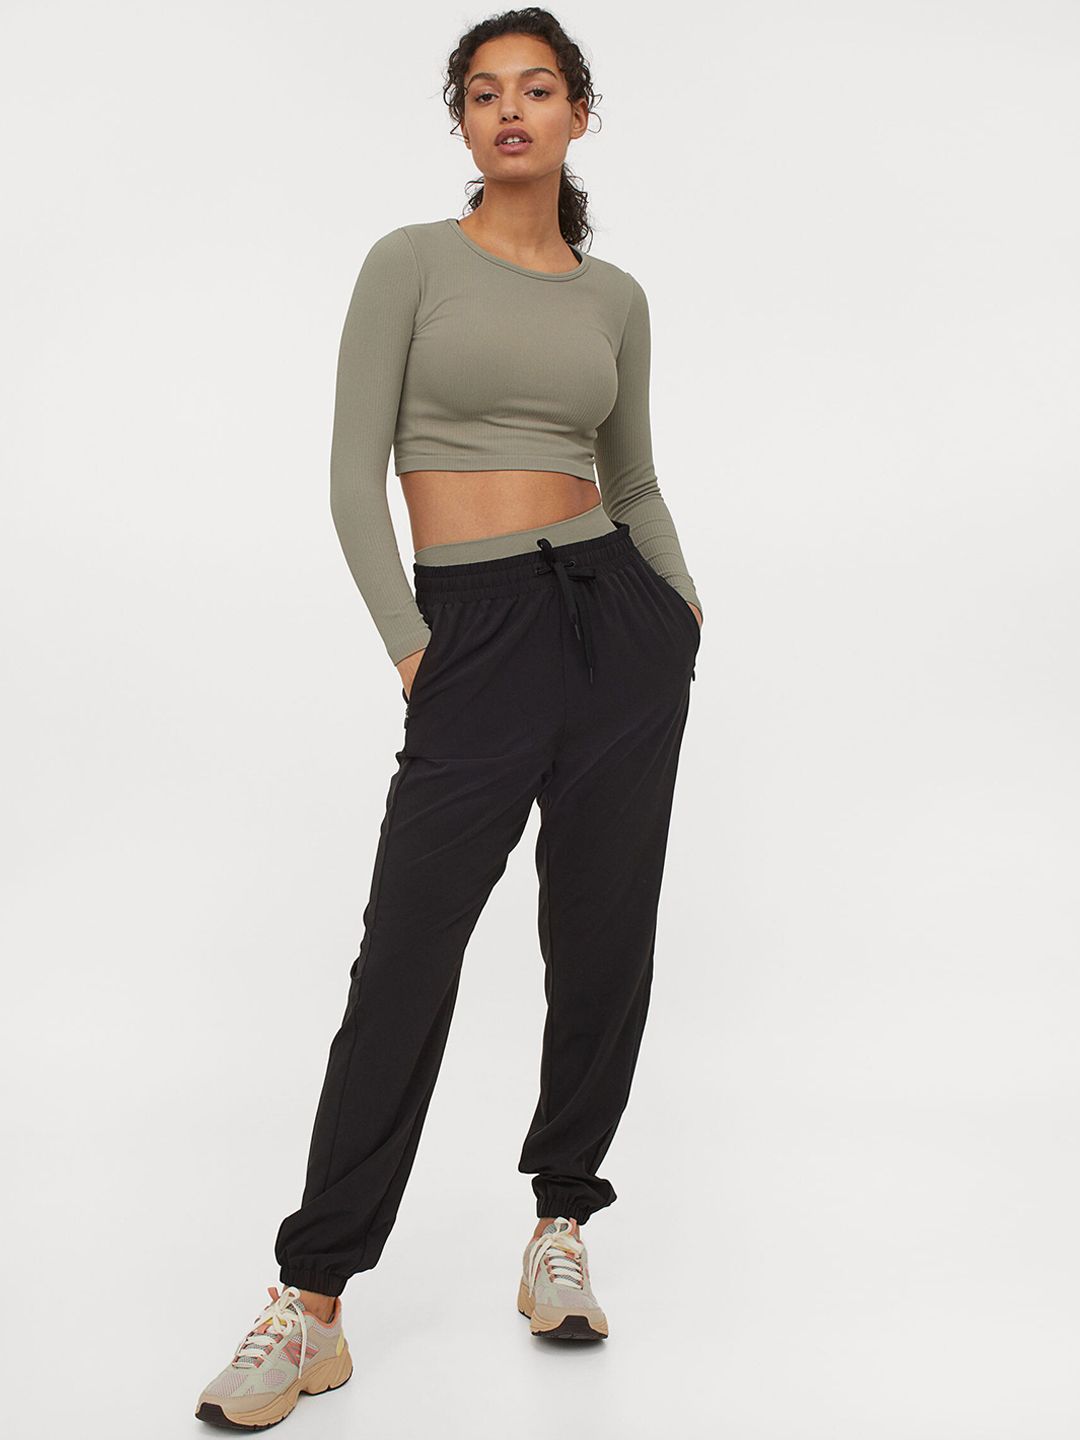 H&M Women Black Solid High Waist Track pants Price in India